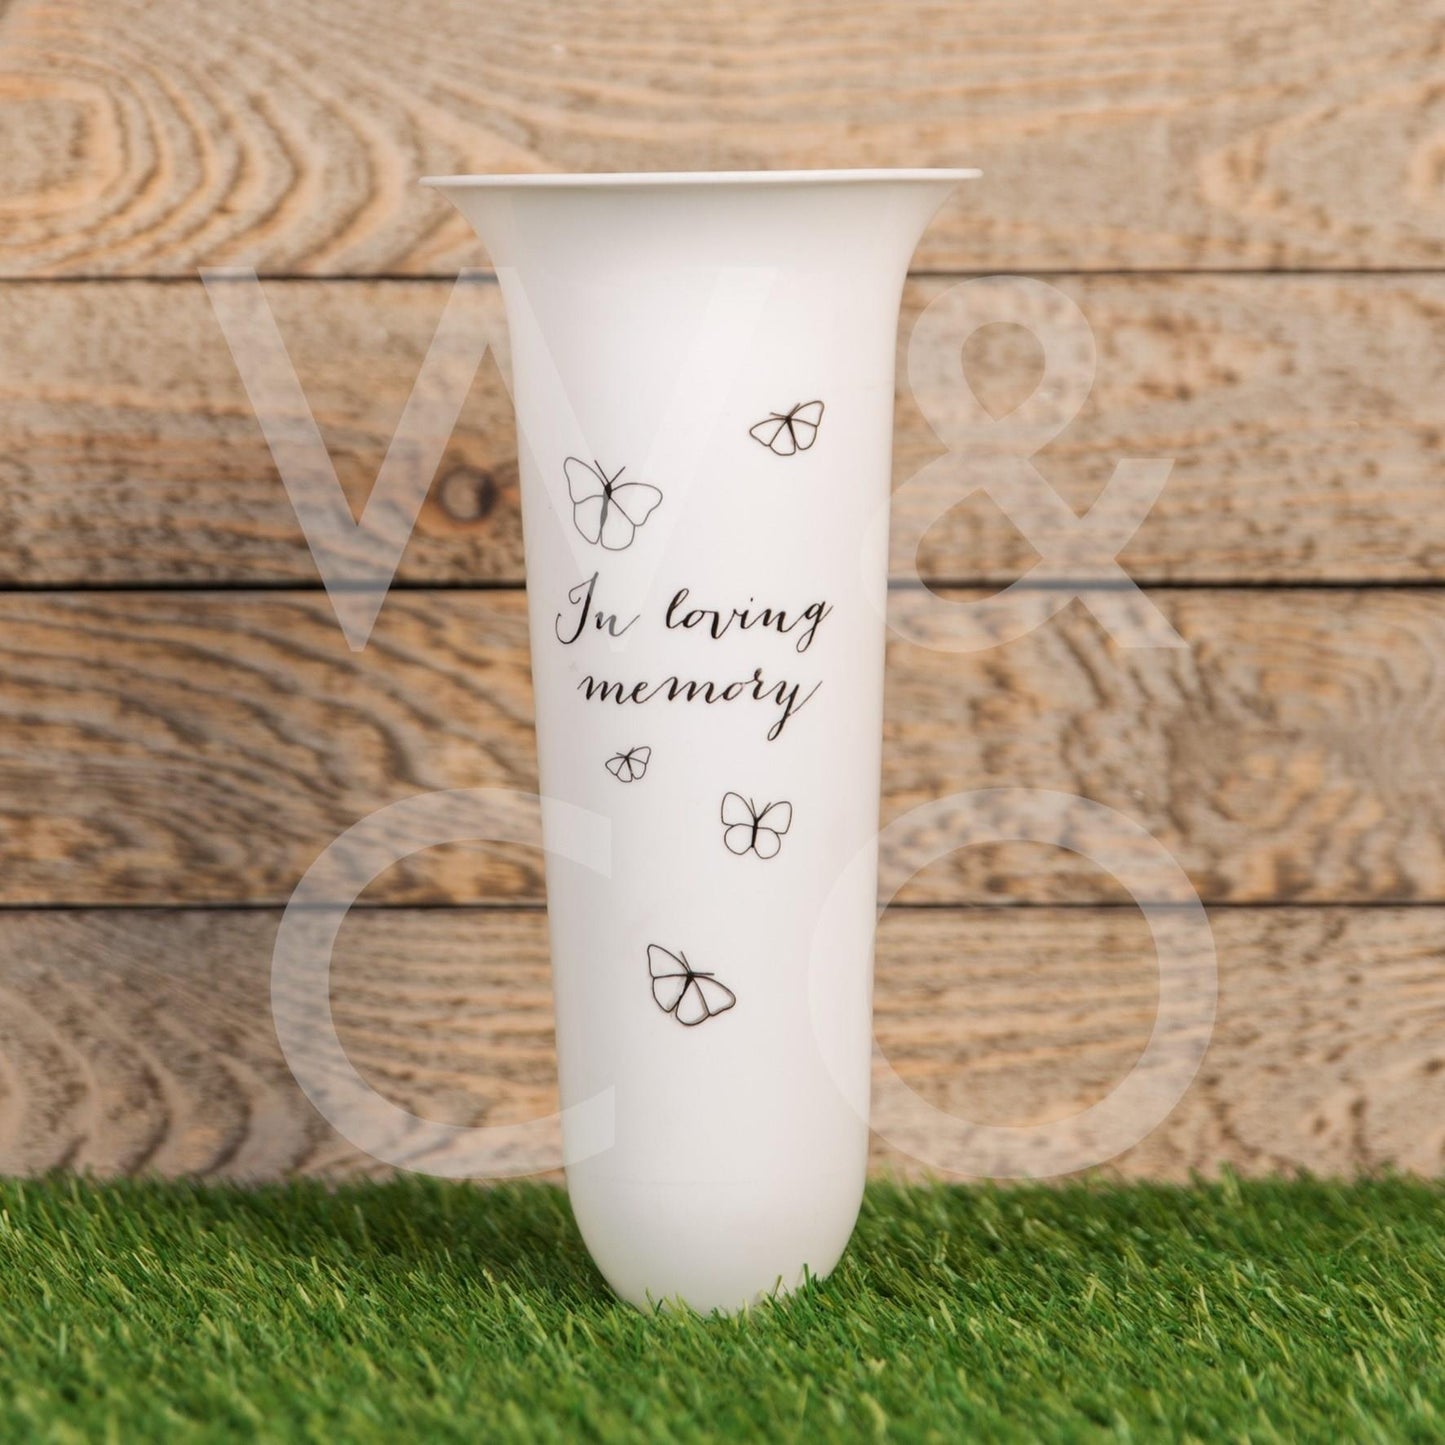 Thoughts Of You 'In Loving Memory' Vase